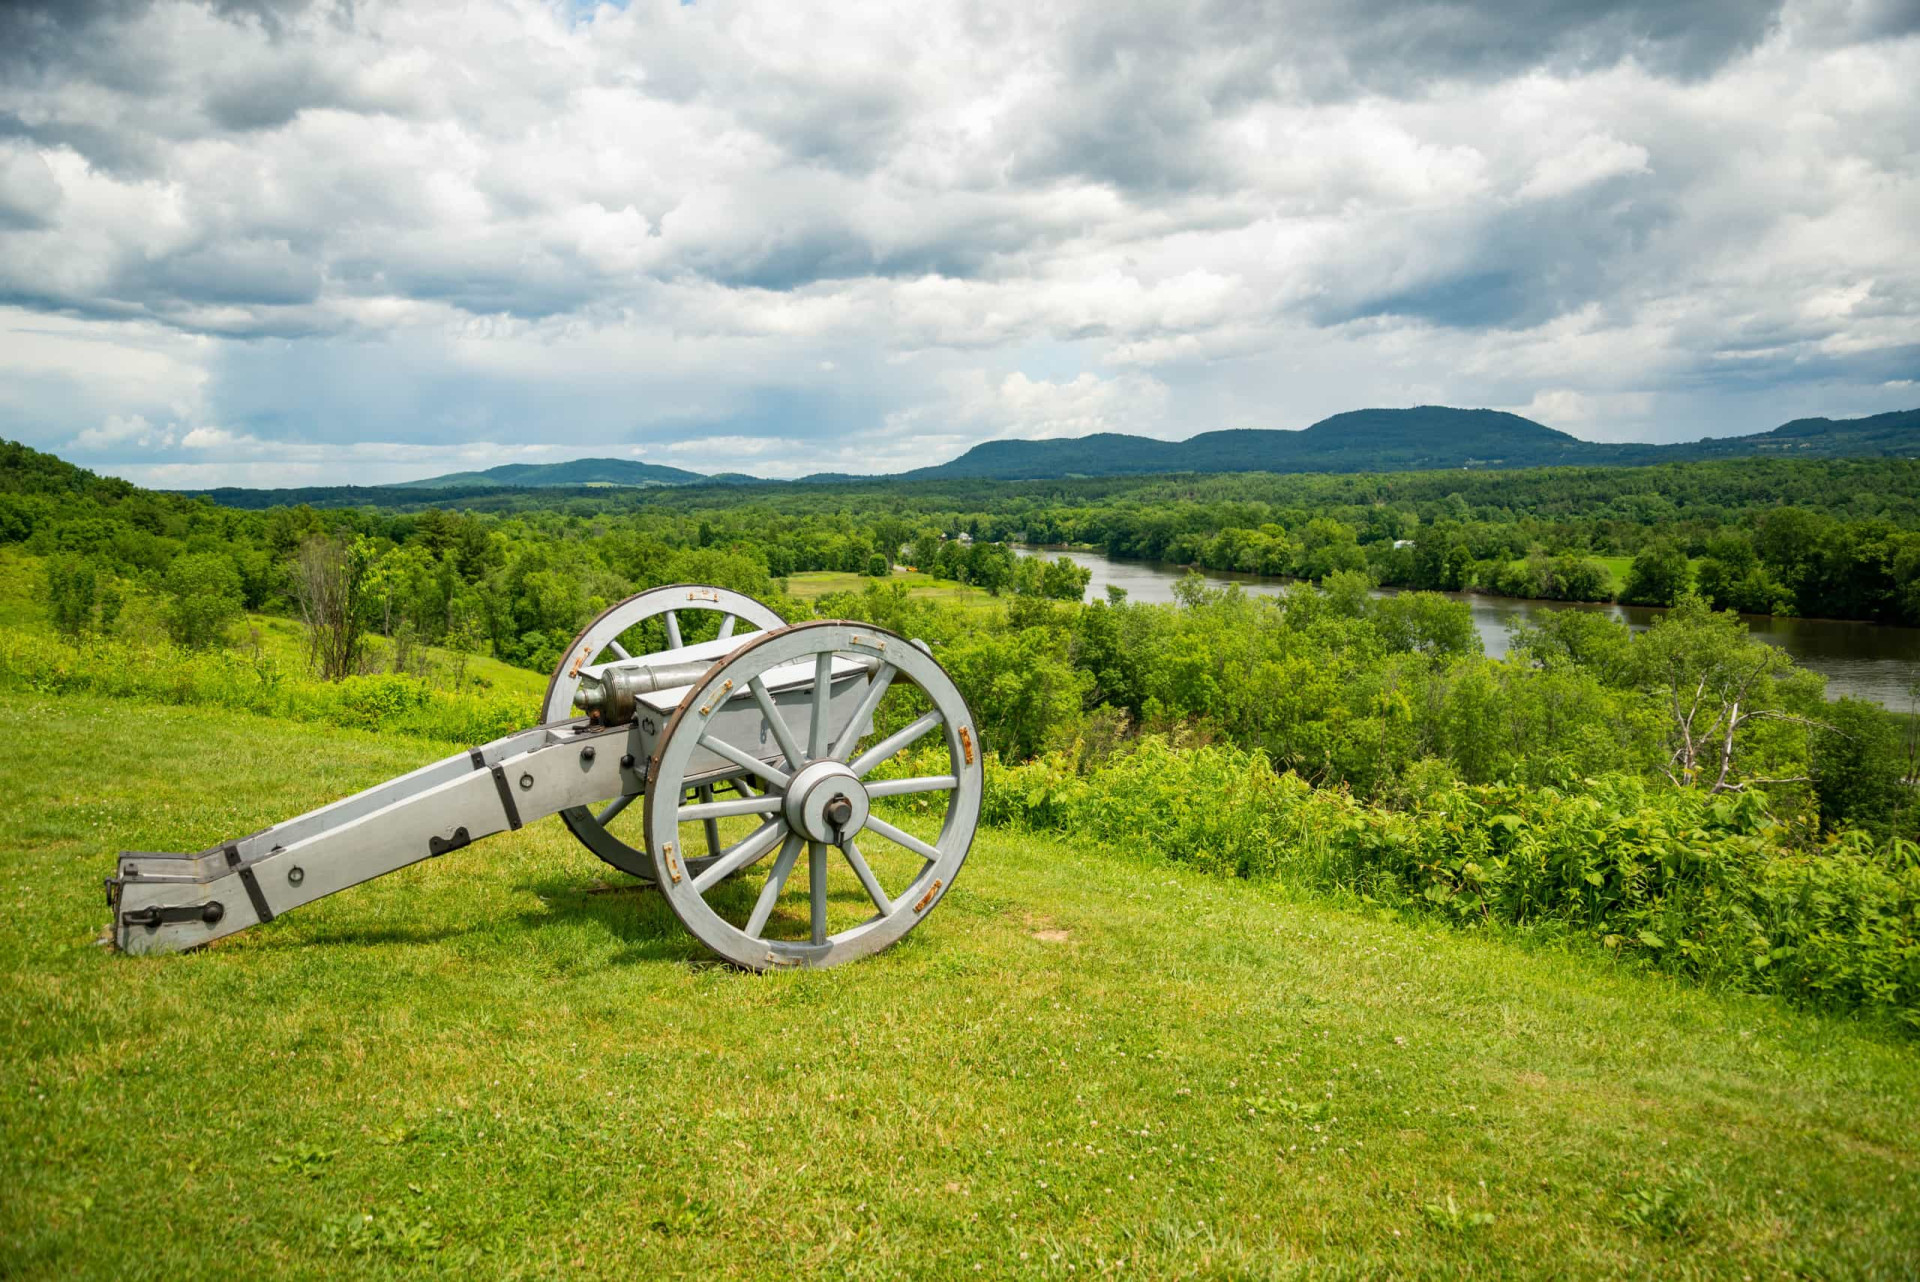 <p>The Saratoga National Historical Park in upstate New York embraces the location where the Battles of Saratoga took place, a series of engagements during the Saratoga Campaign of September 19 and October 7, 1777, that concluded with a decisive victory for the Americans over the British in the American Revolutionary War.</p>